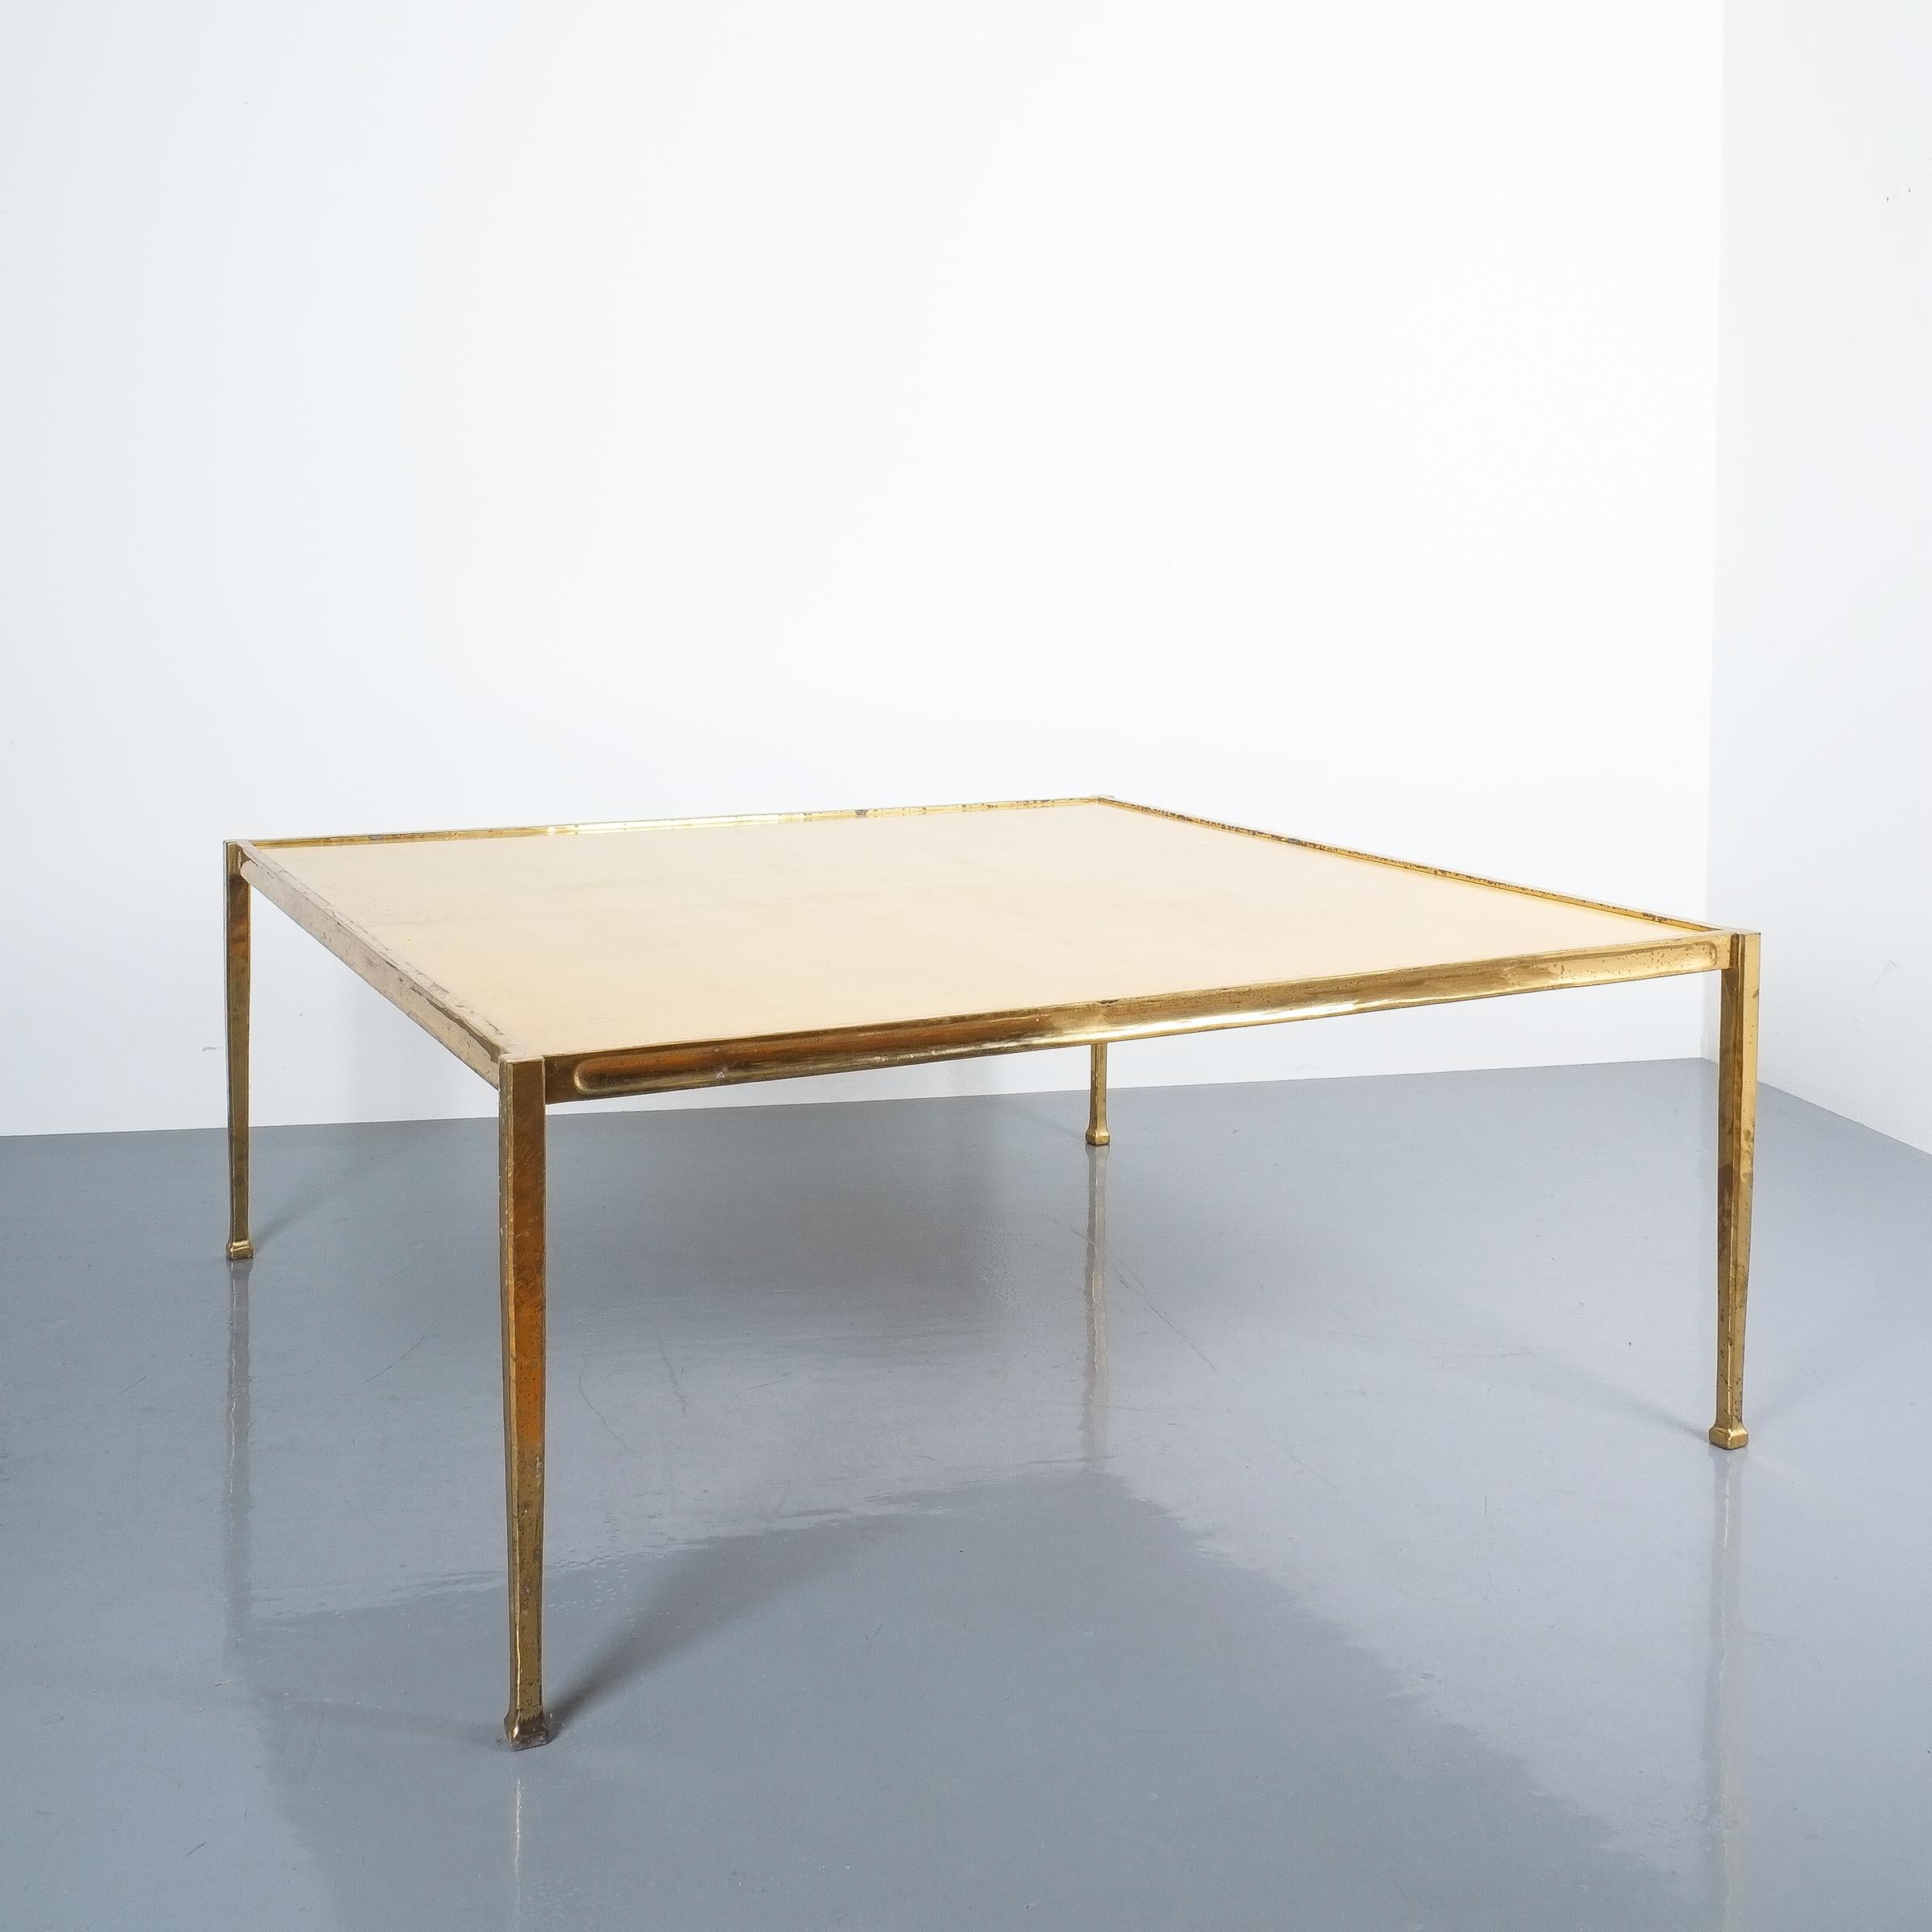 Square large coffee table from solid brass and parchment, France, circa 1965

This elegant table consist of a solid cast brass frame with a large parchment on wood tabletop divided in 4 segments. The brass is beautifully golden patinated, the